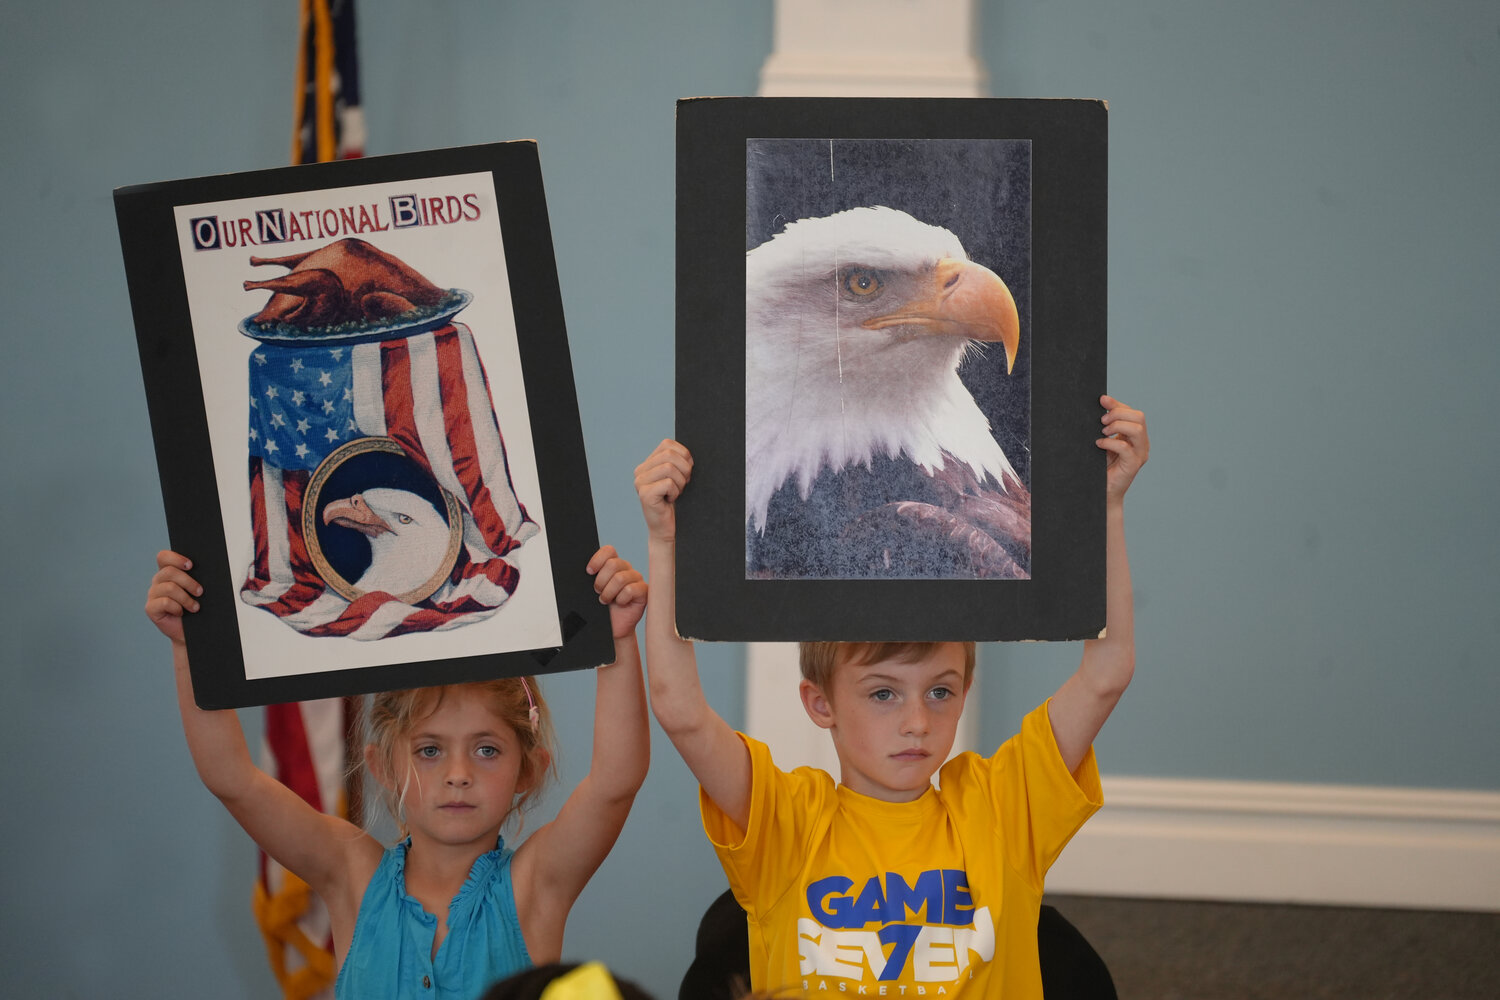 Abigail Ferro, left, and Benjamin Rzeszut hold up images of our national bird, the American Bald Eagle.